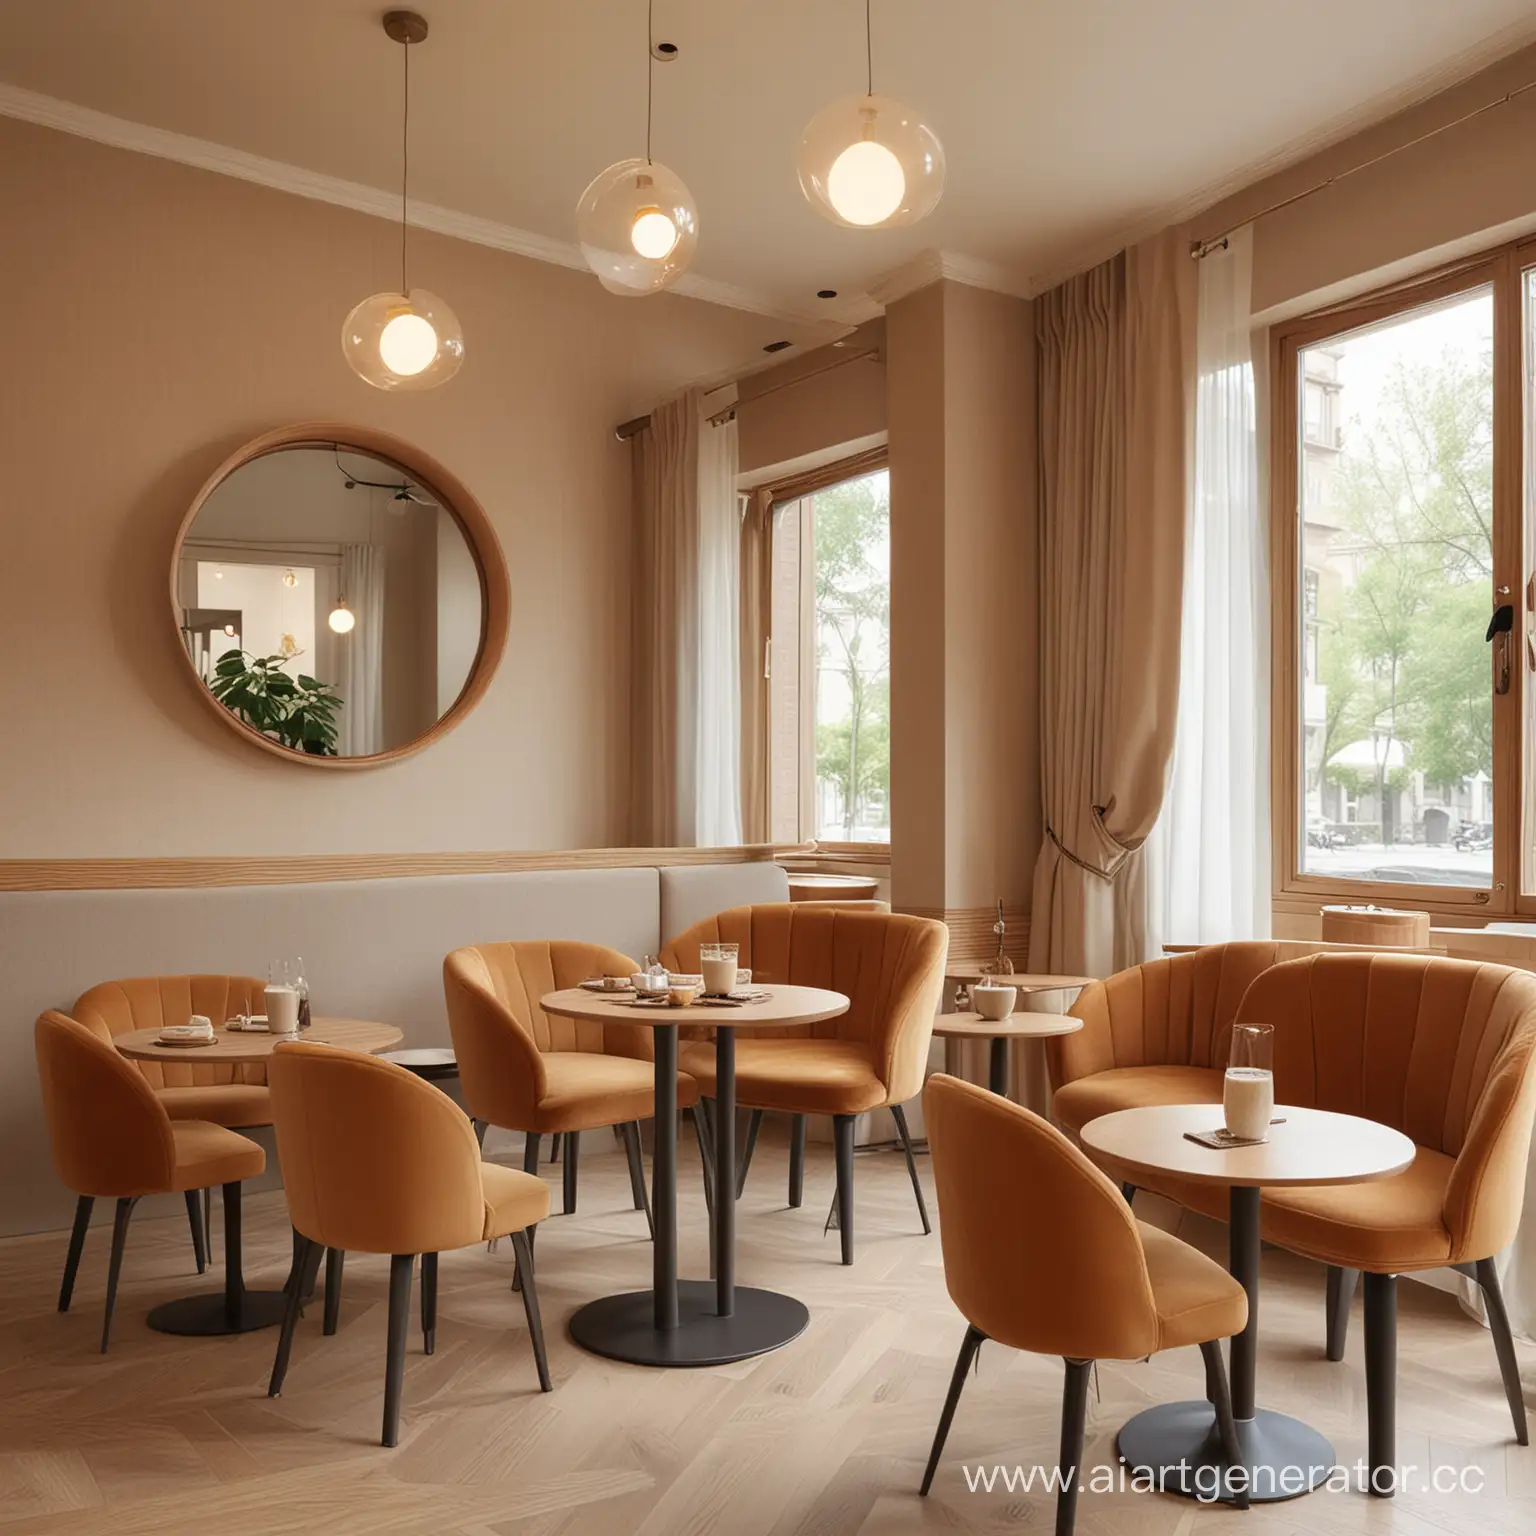 Modern-and-Cozy-Cafe-Cookie-and-Cup-Warm-Ambiance-with-Soft-Furnishings-and-Delicate-Accents